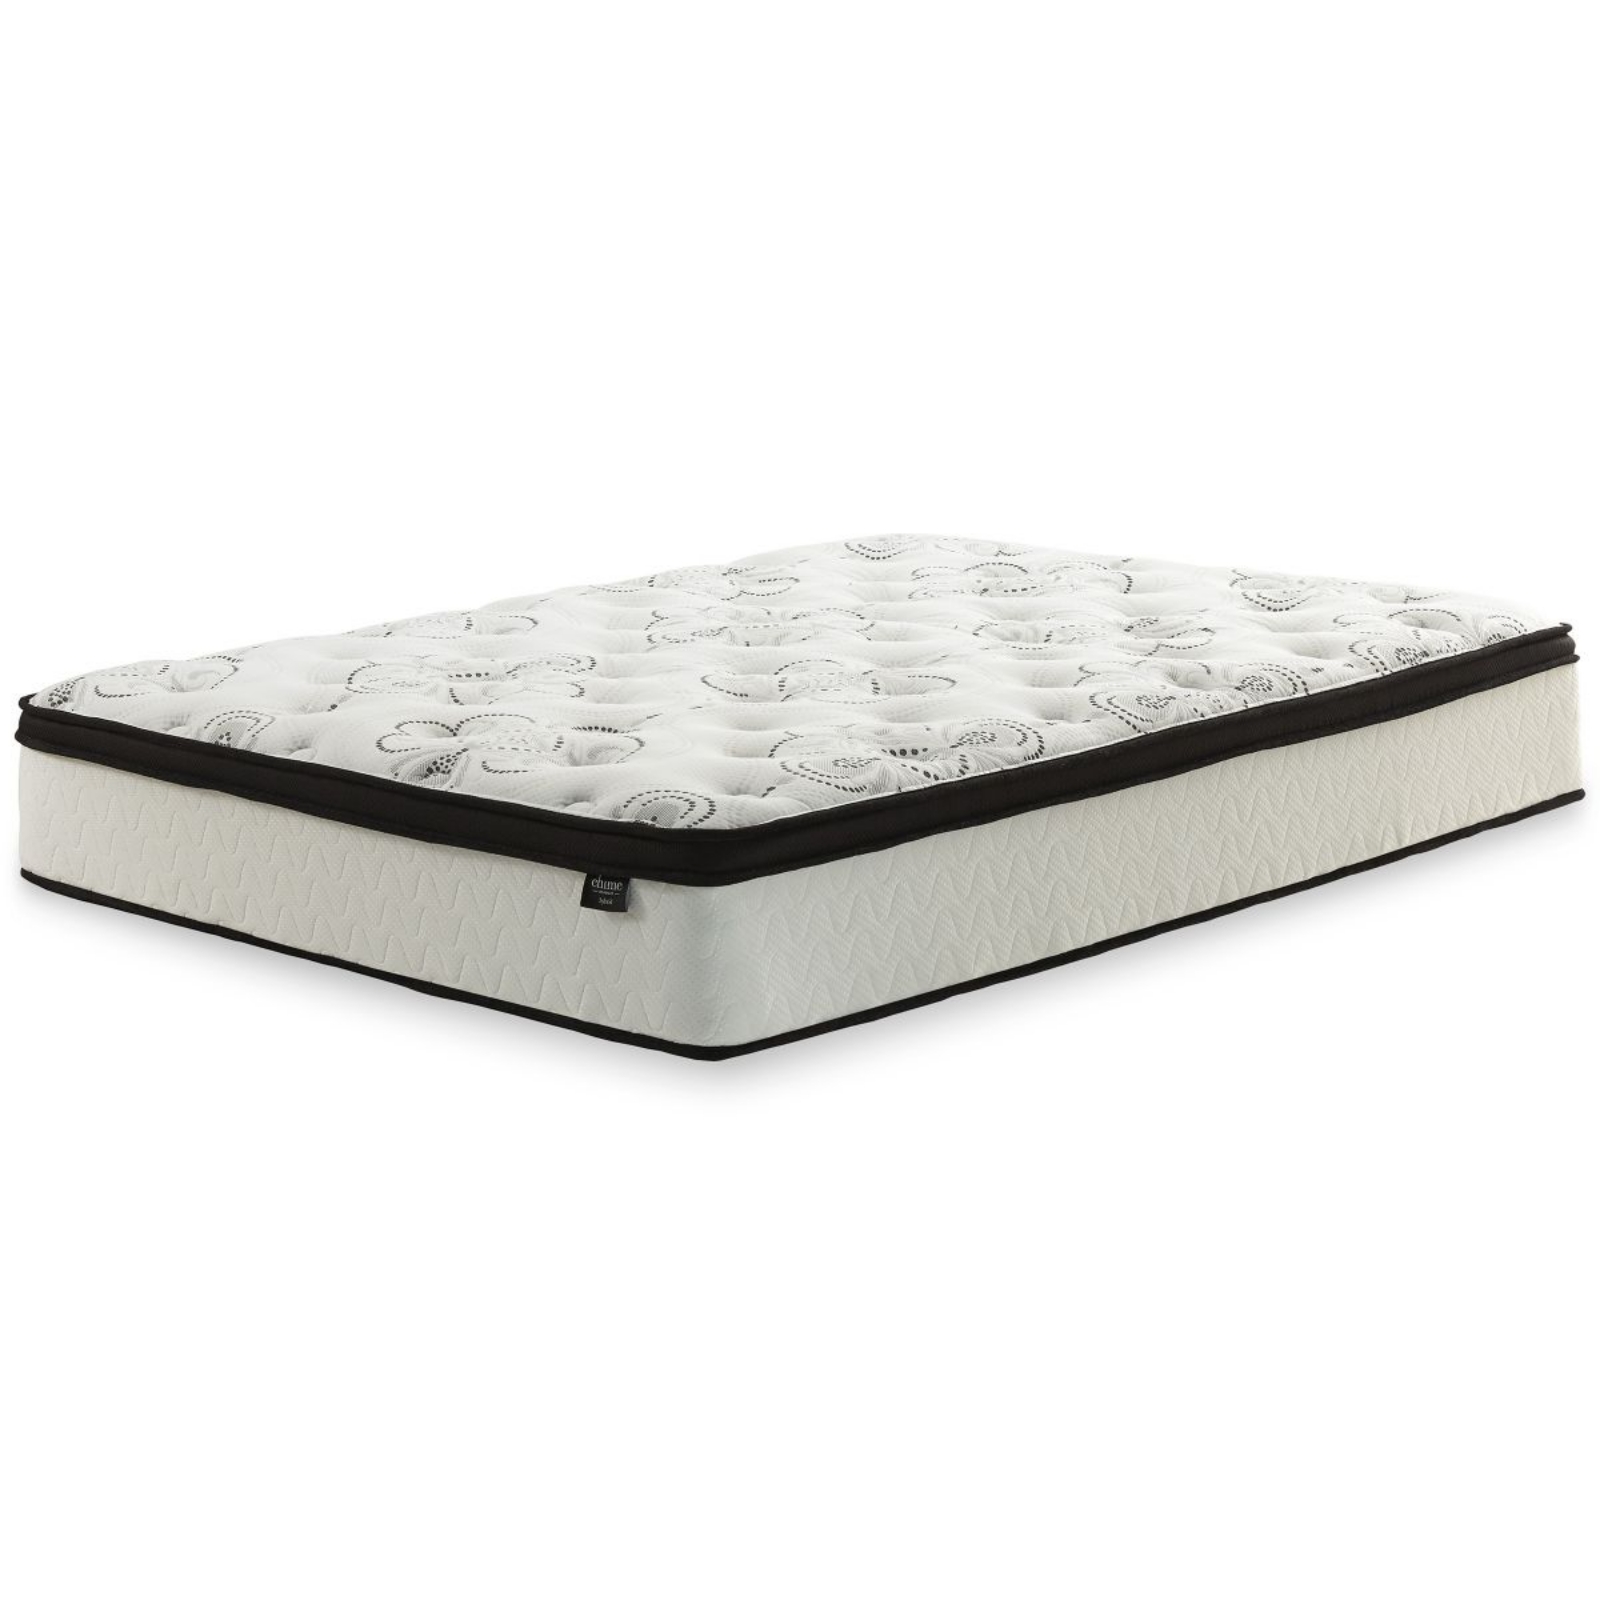 Picture of Chime 12 Inch Hybrid Full Mattress